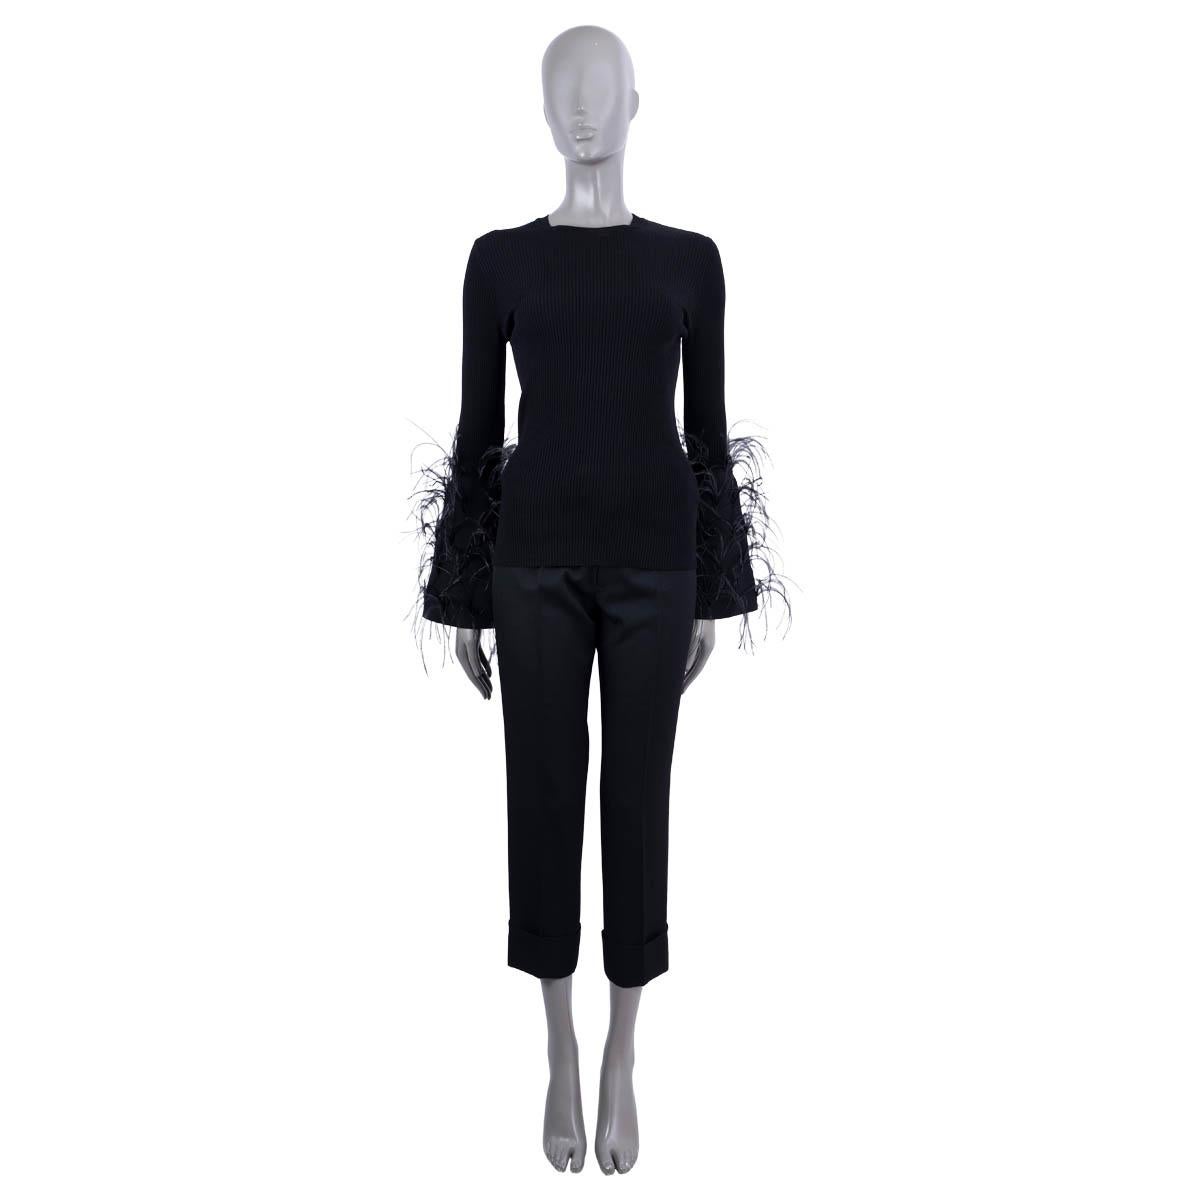 100% authentic Valentino top in black rib-knit viscose (83%) and polyester (17%). Features a feather trimmed on the sleeves. Unlined. Has been worn and is in excellent condition.

2019 Spring/Summer

Measurements
Tag Size	M
Size	M
Shoulder